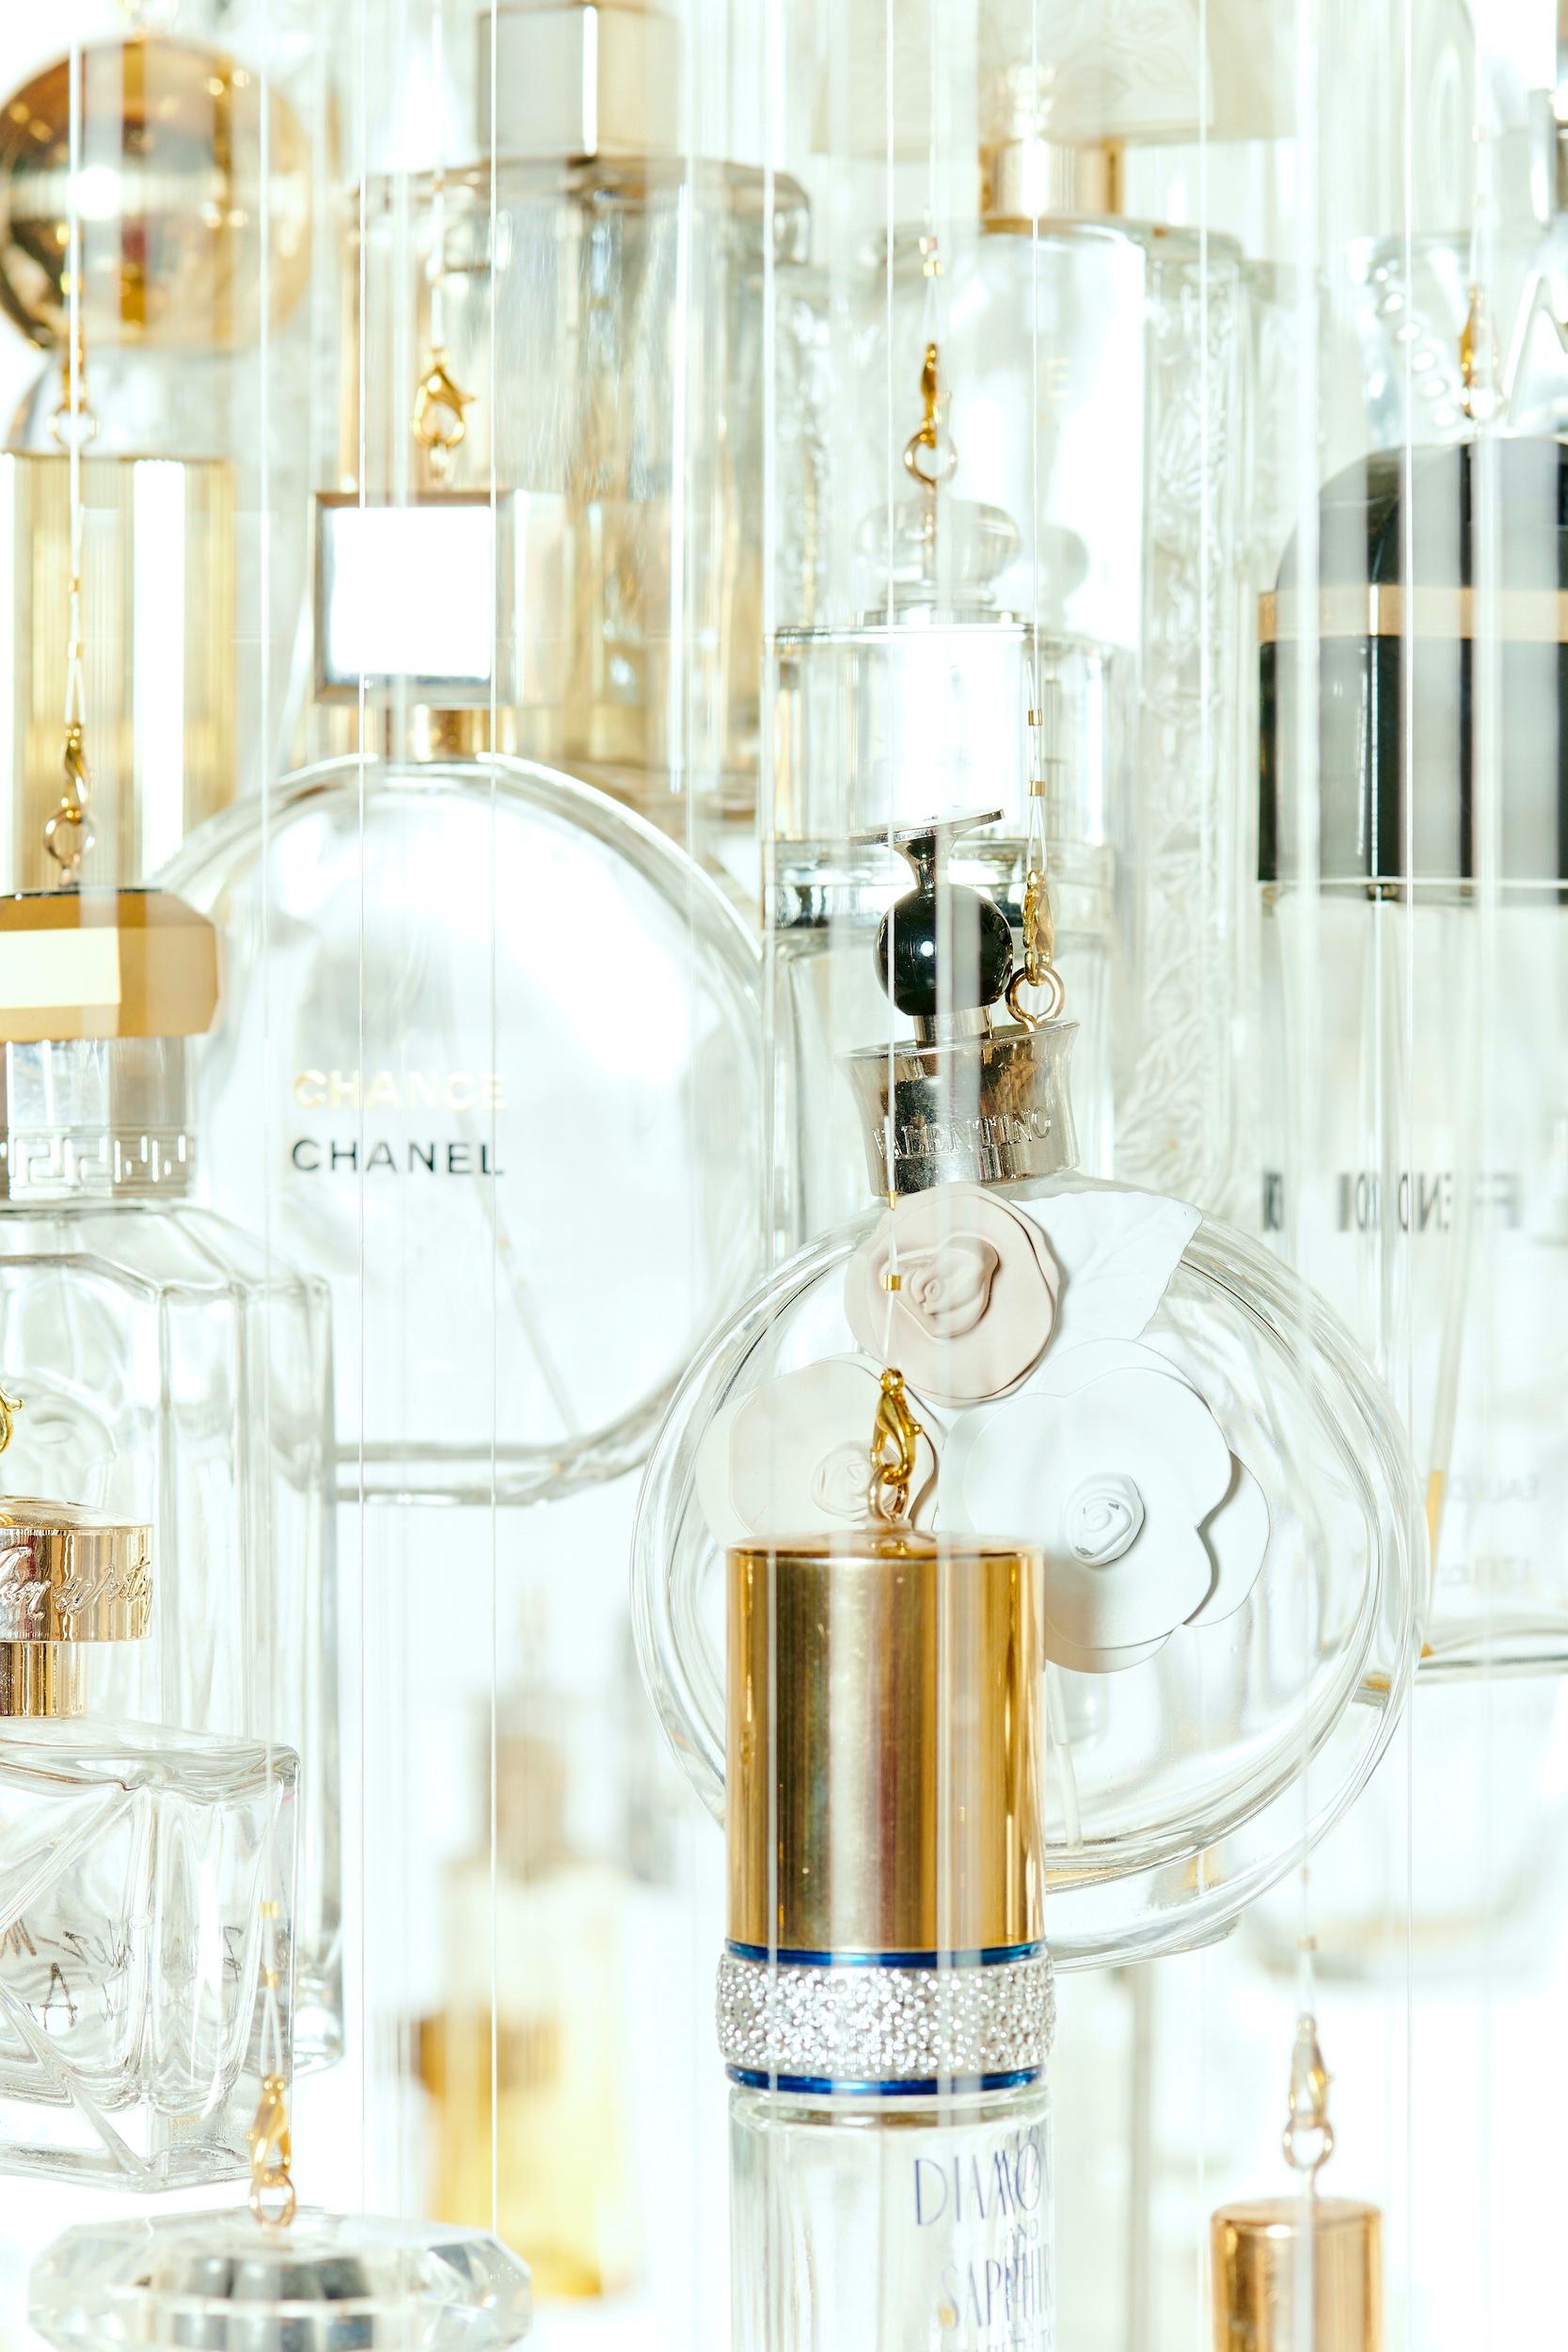 A drop of essence 116 Gold. A chandelier made from personal collections of perfume bottles. ‘Cherished’ is Diederik Schneemann’s latest project revolving around the concept of collecting. In search of new interesting materials to work with,